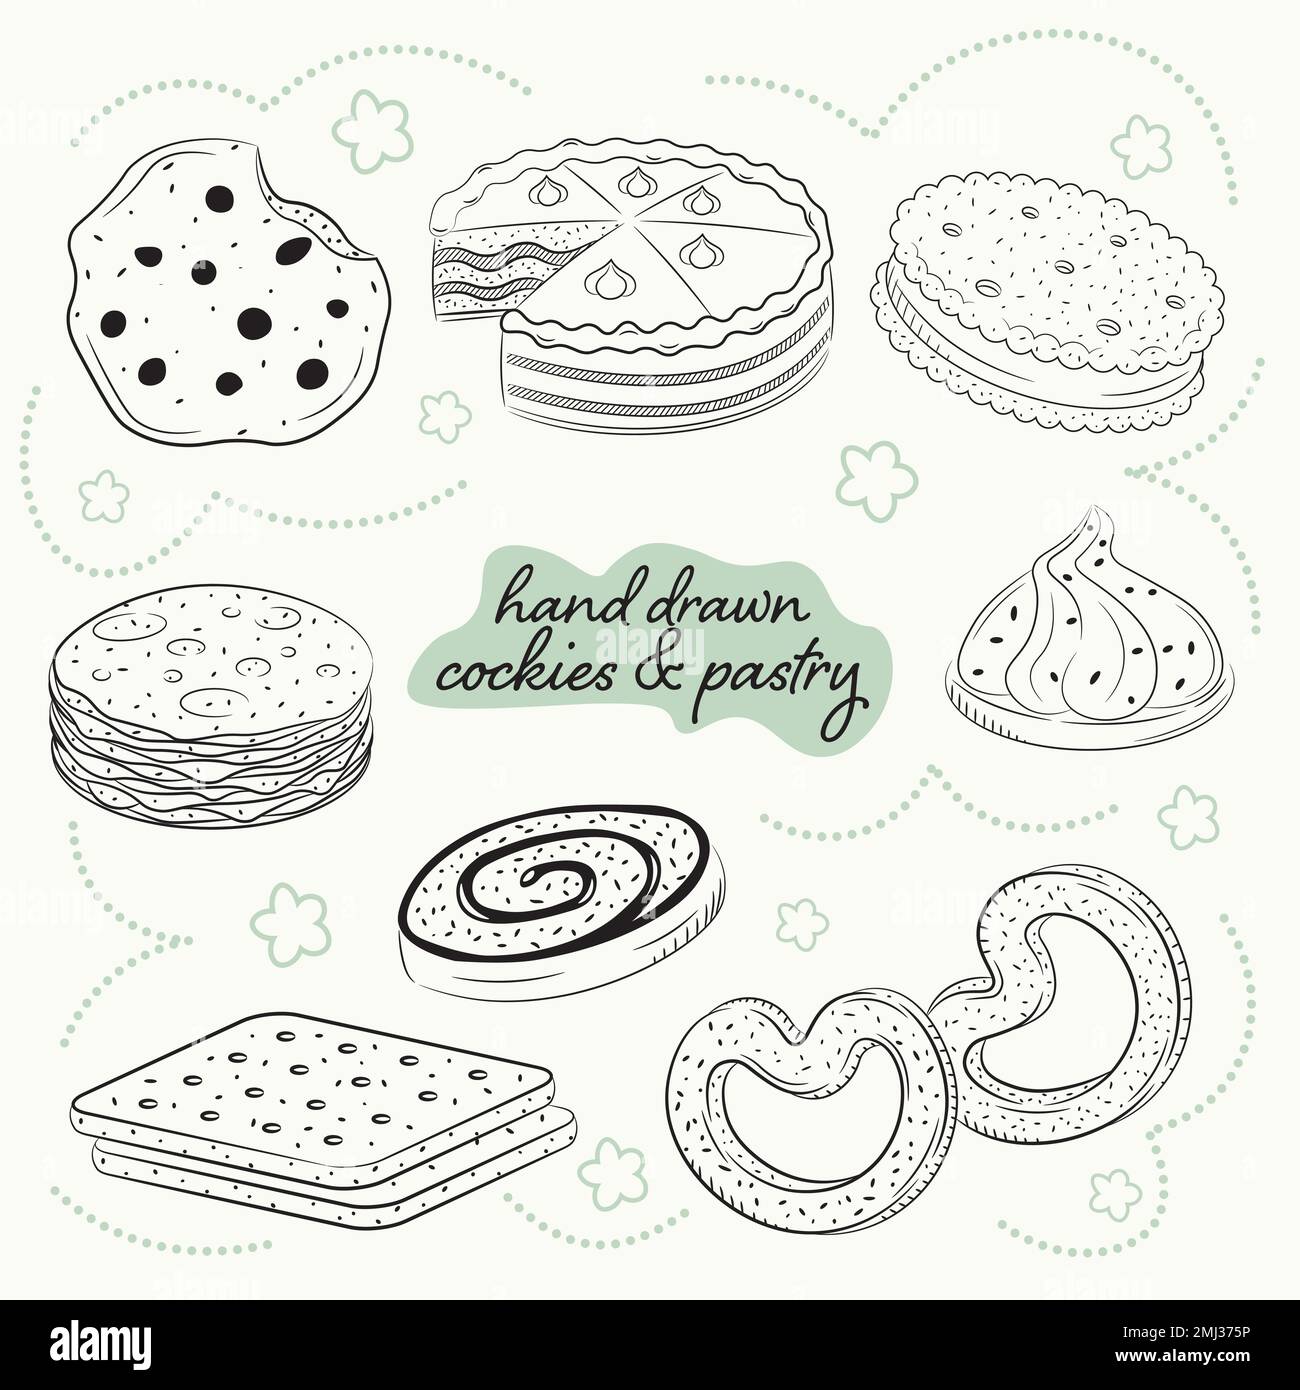 a set of hand drawn coockies and pastry in vector Stock Vector